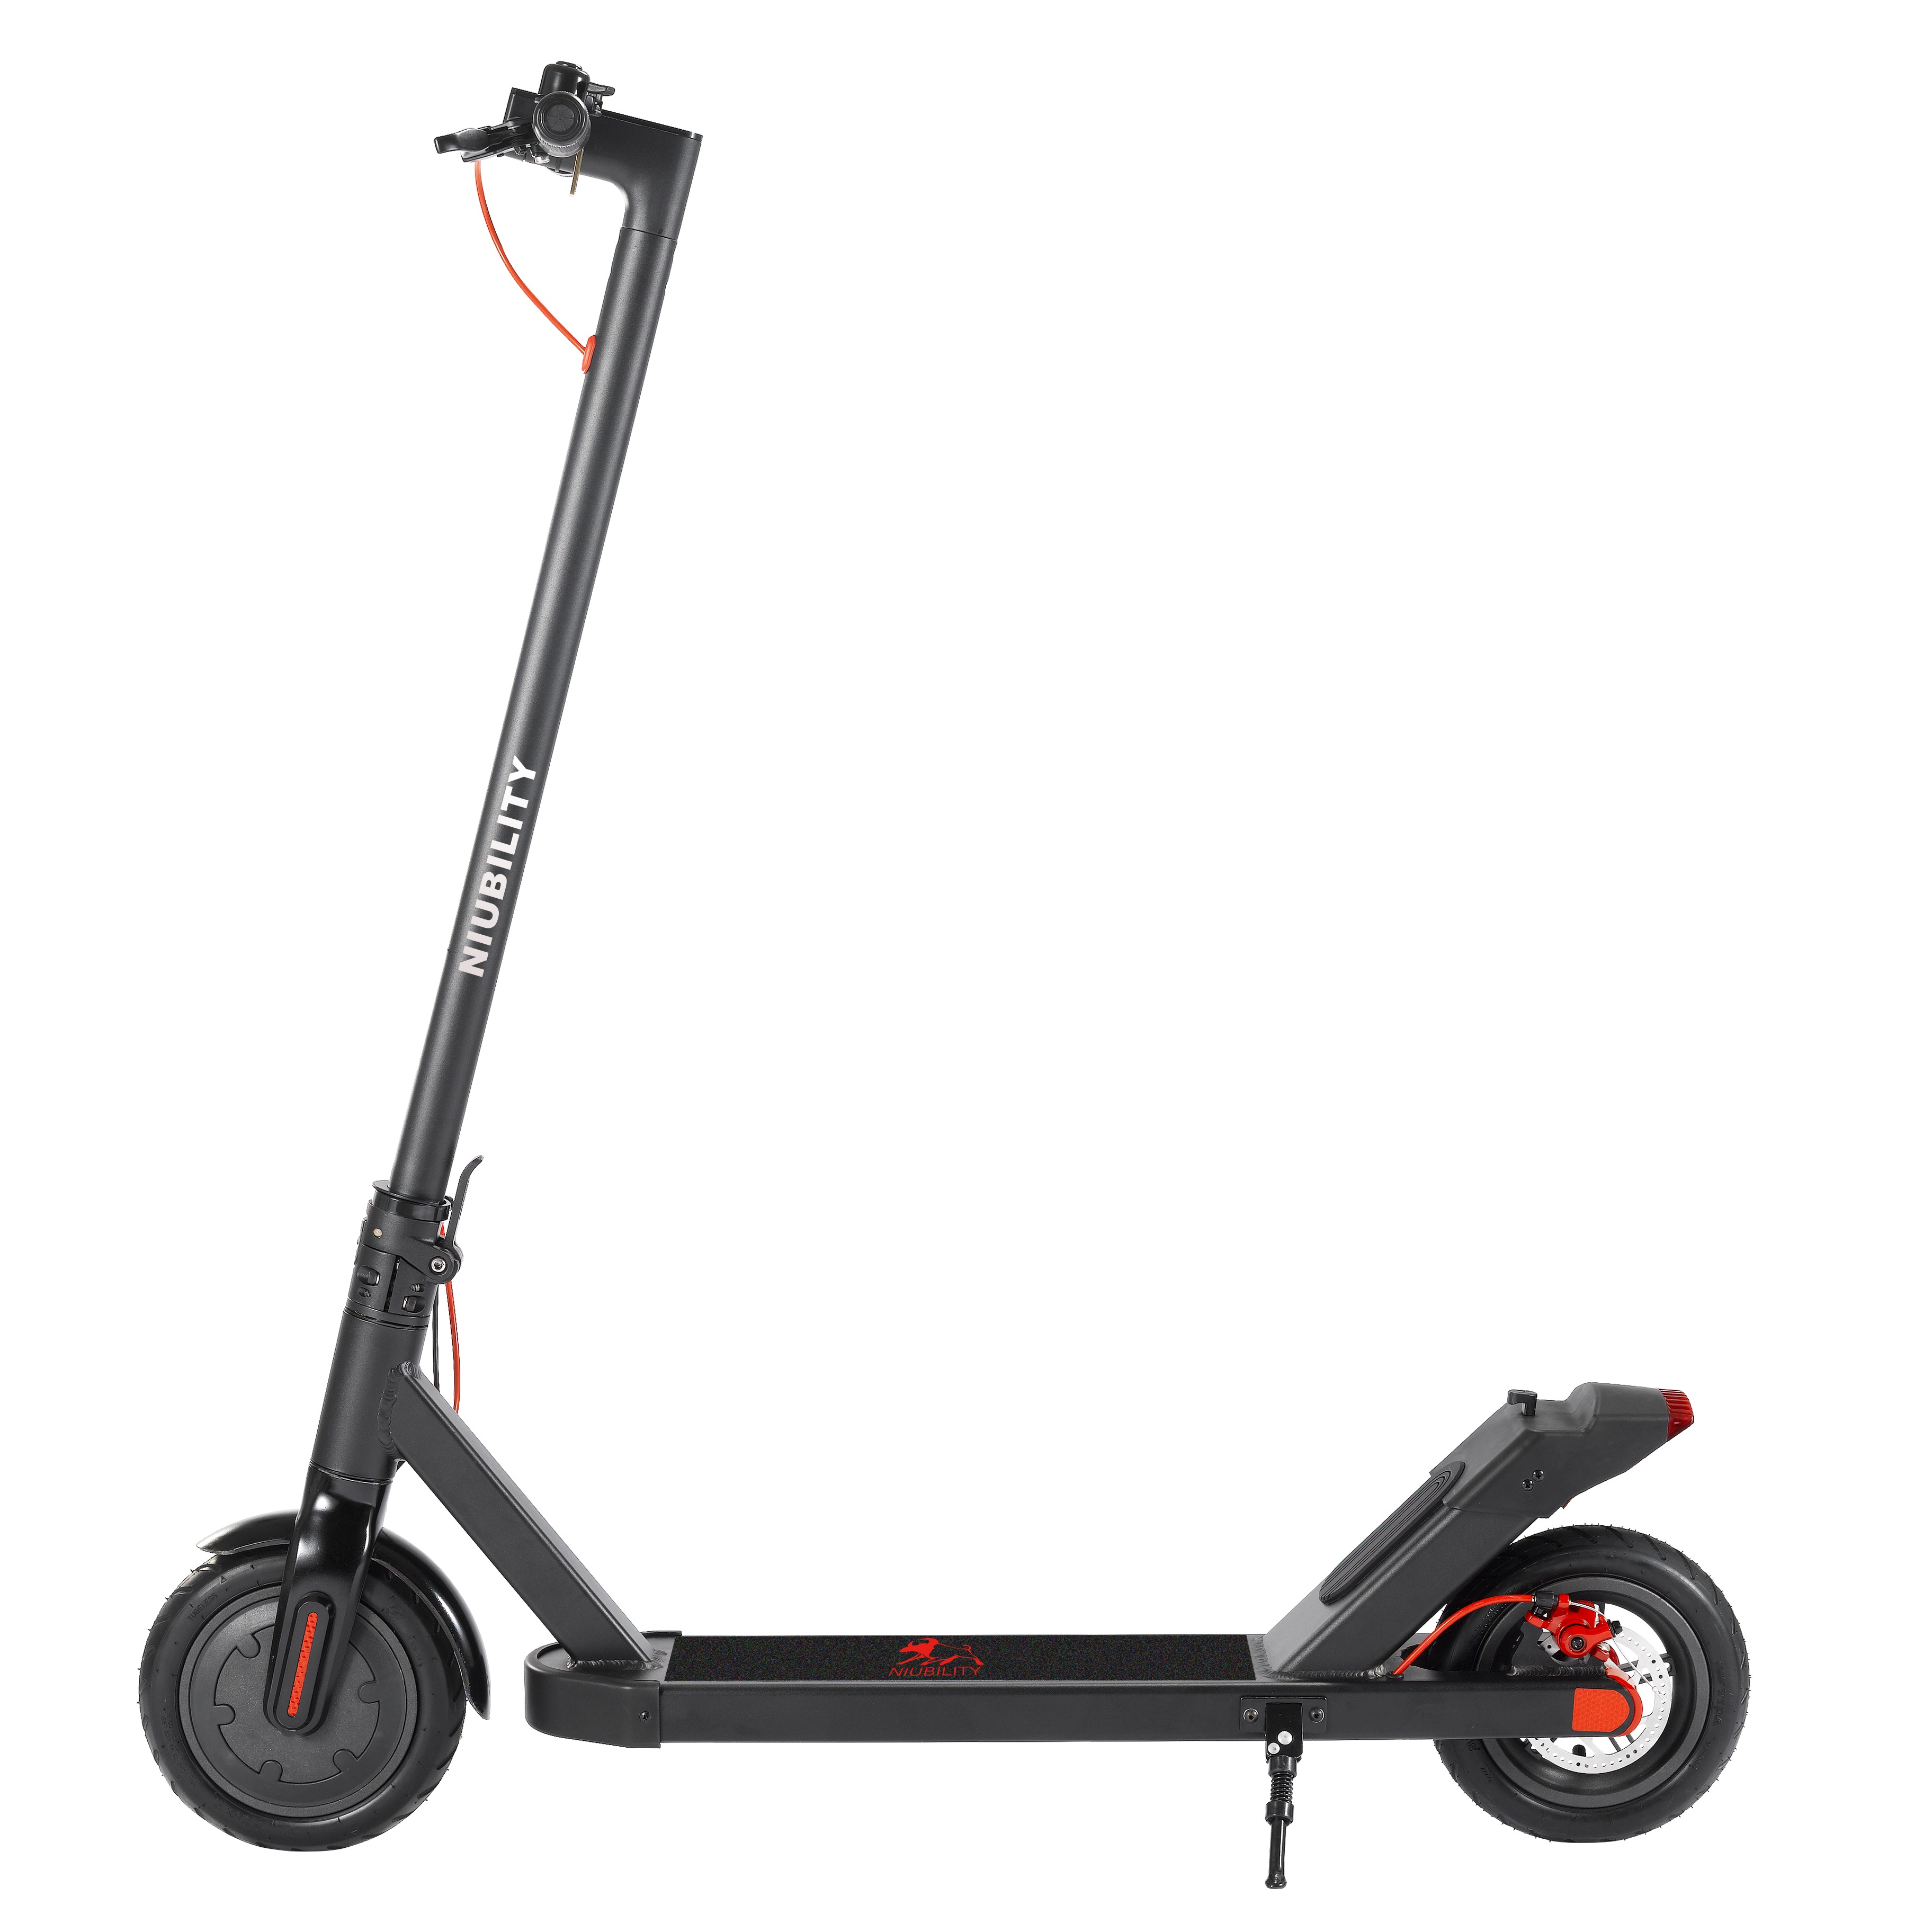 Find EU Direct Niubility N1 7 8Ah 36V 250W 8 5 Inches Tires Folding Electric Scooter 25km/h Top Speed 20 25KM Mileage Range Electric Scooter for Sale on Gipsybee.com with cryptocurrencies